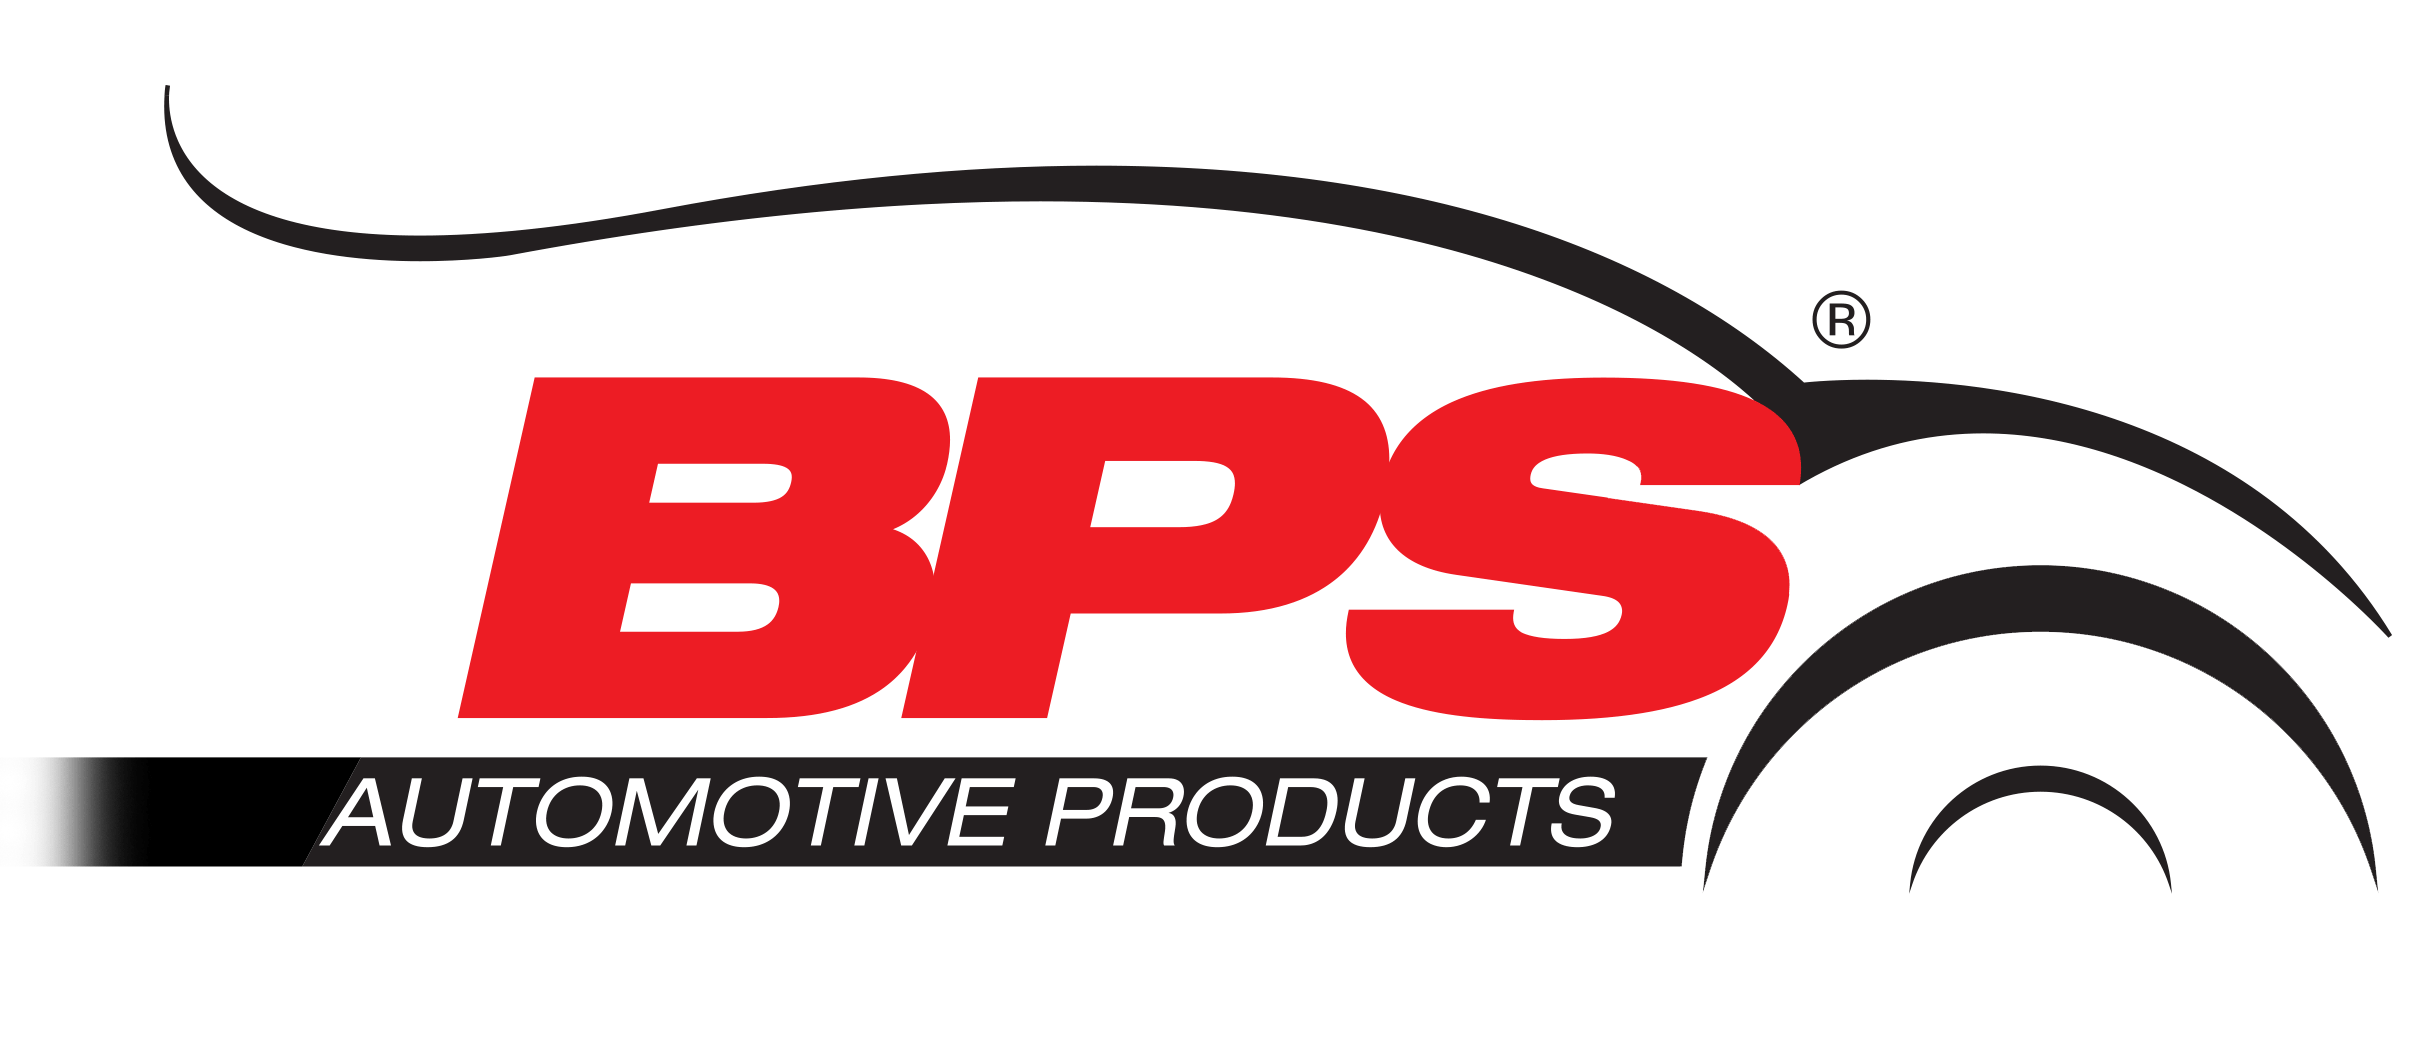 Automotive Products Logo - BPS Automotive Products | High-quality Water Pumps and Parts for ...